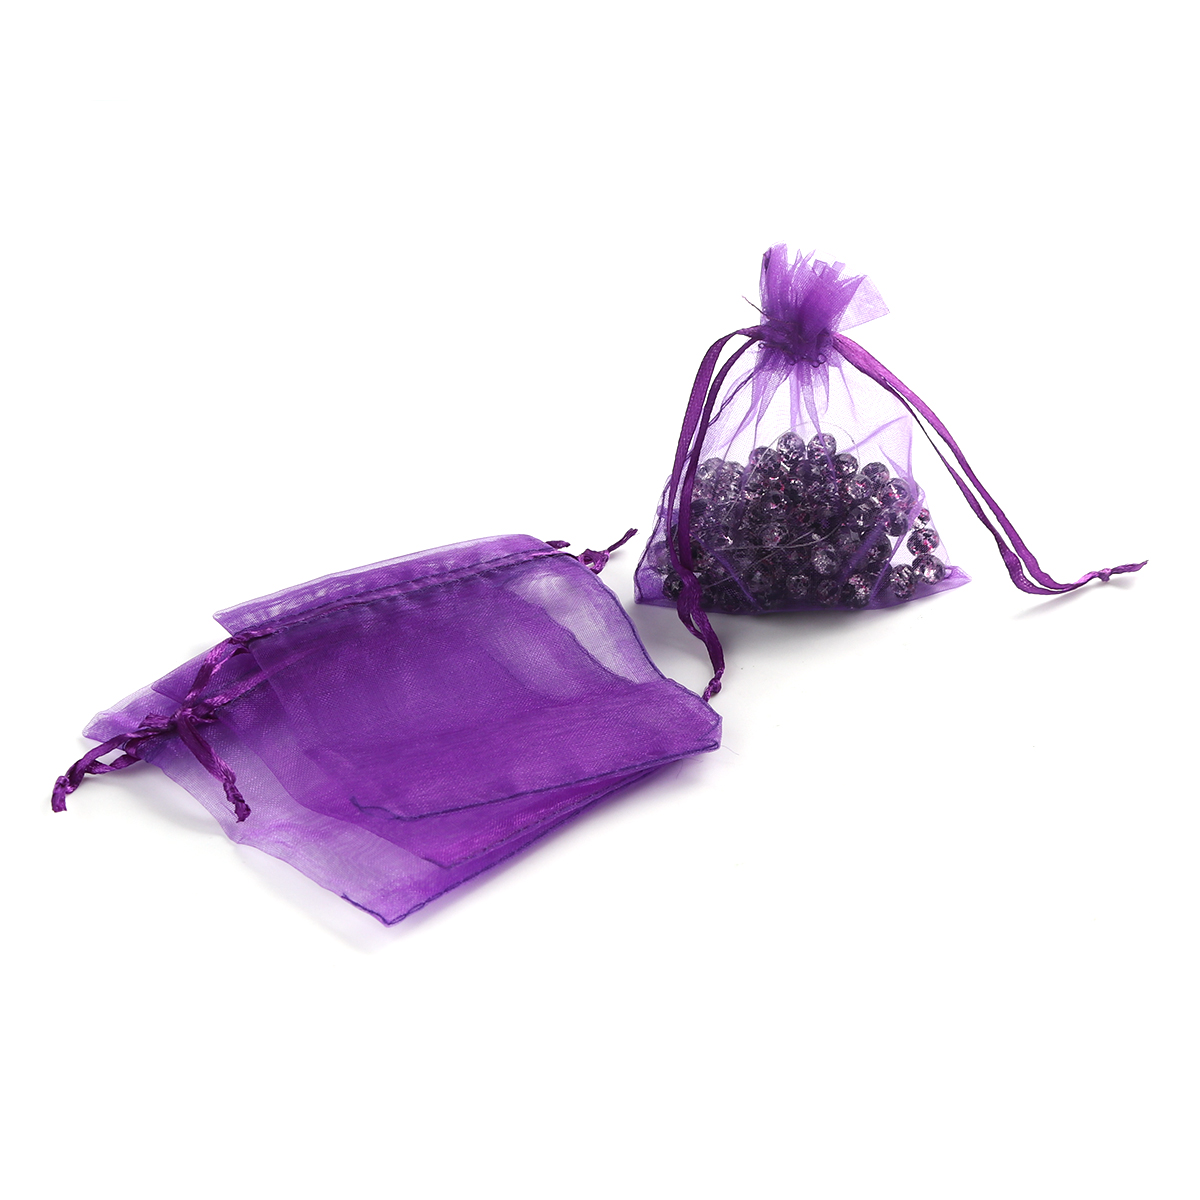 Picture of Wedding Gift Organza Jewelry Bags Drawstring Rectangle Dark Purple 10cm x8cm(3 7/8" x3 1/8"), (Usable Space: 8x8cm) 30 PCs